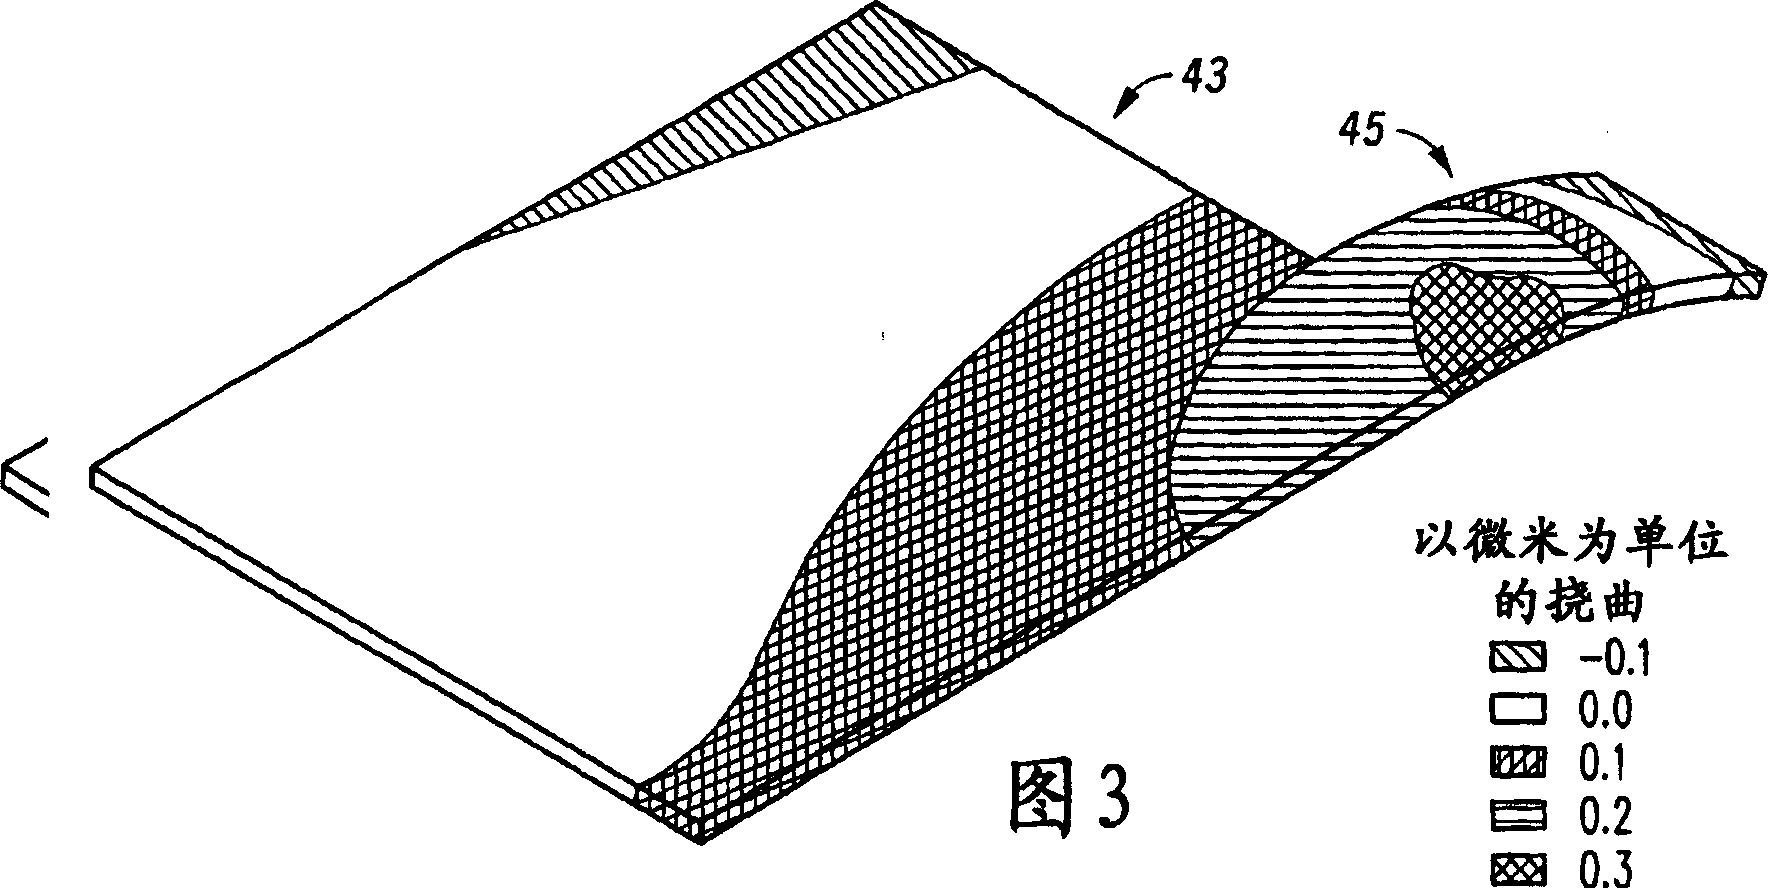 Method of adding mass to MEMS structures